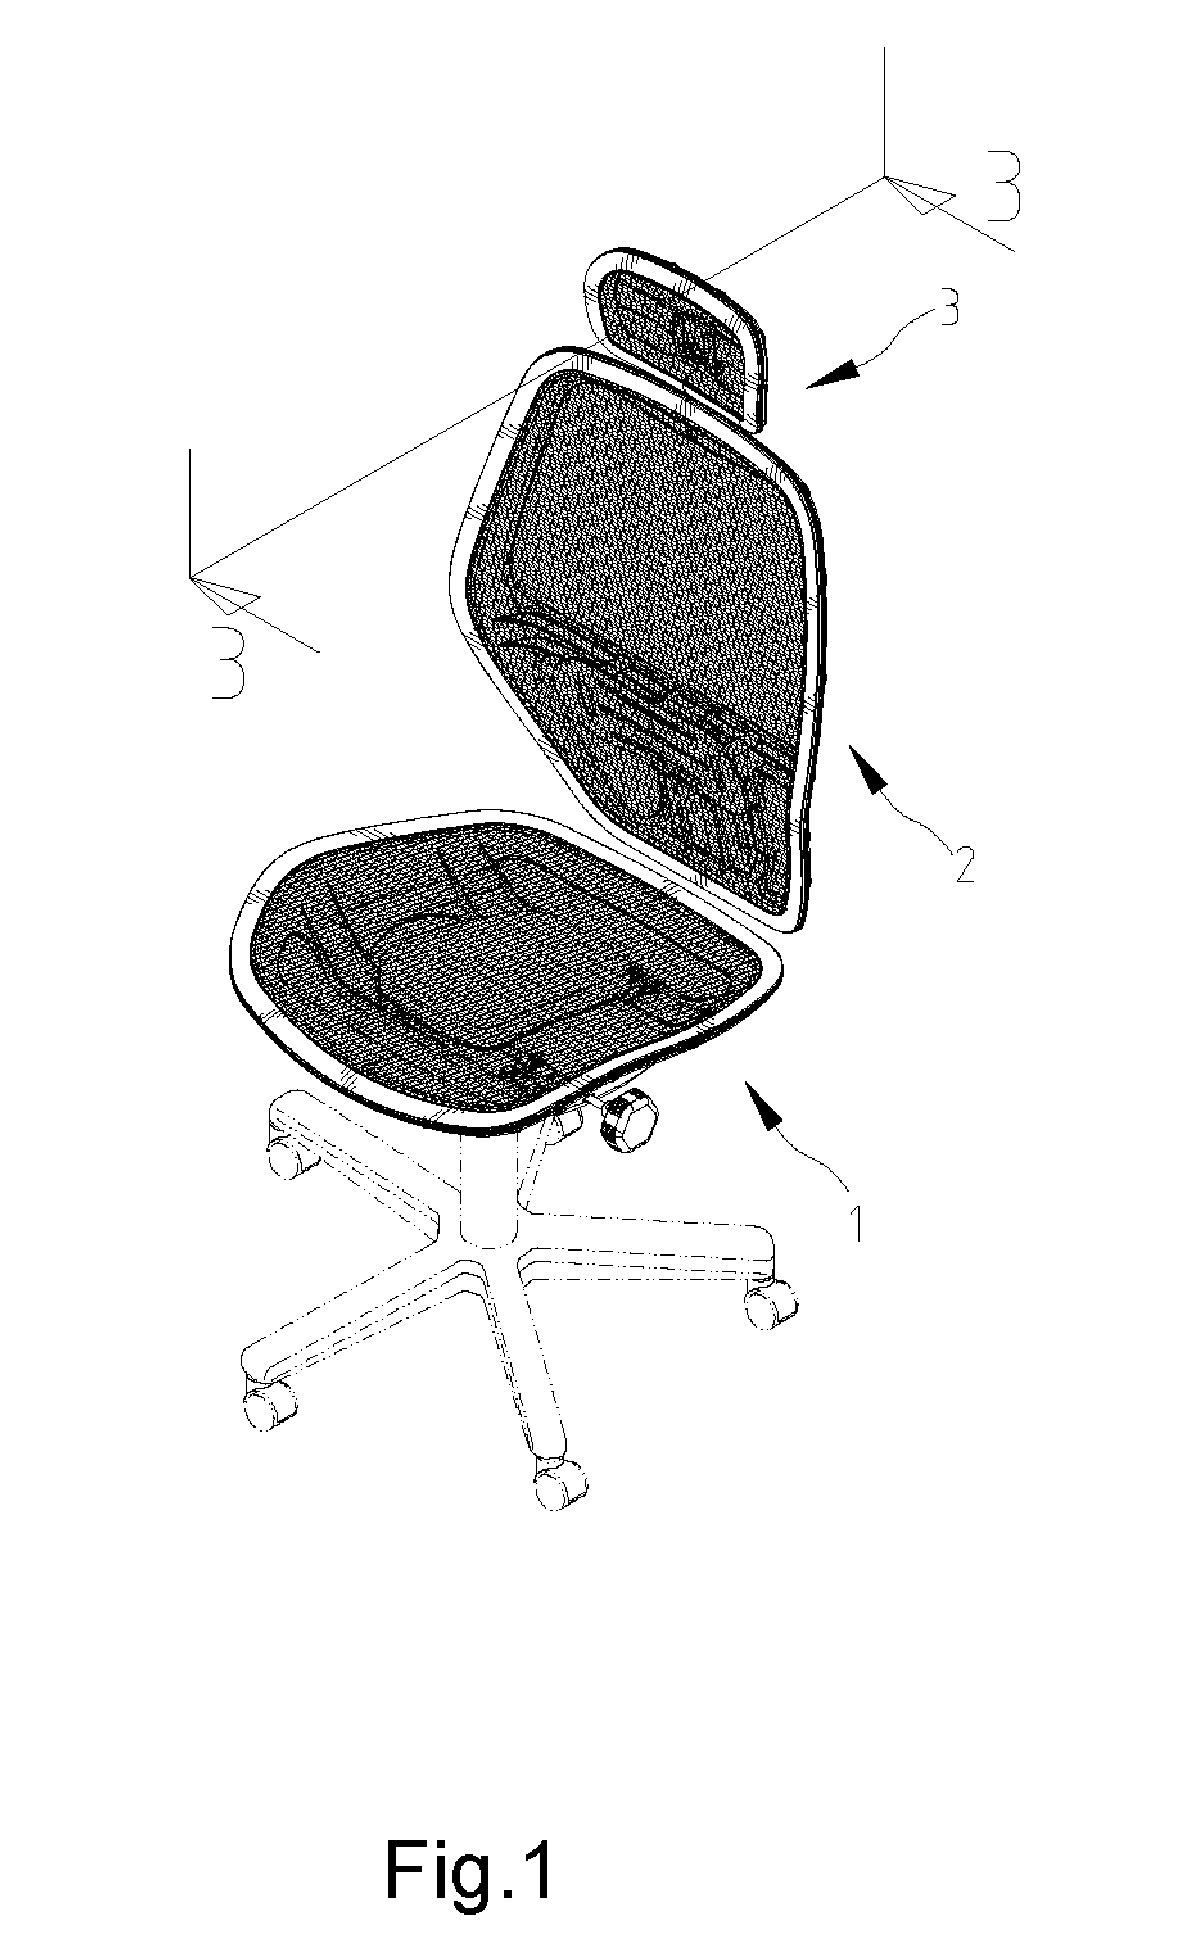 Body-supporting device